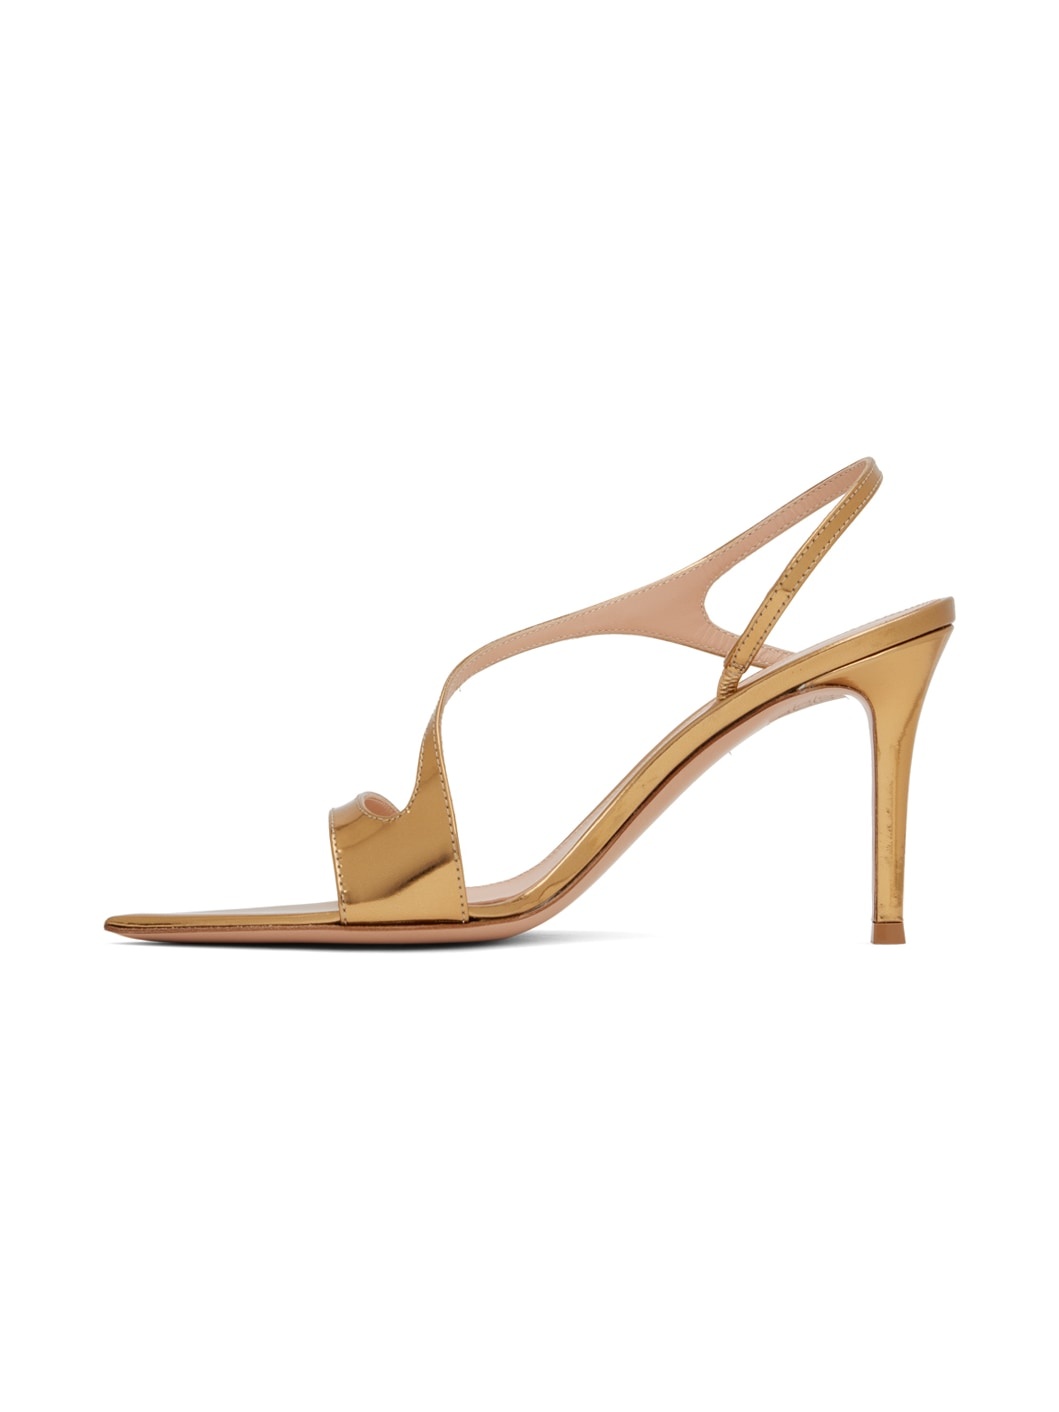 Gold Crossover Heeled Sandals - 3